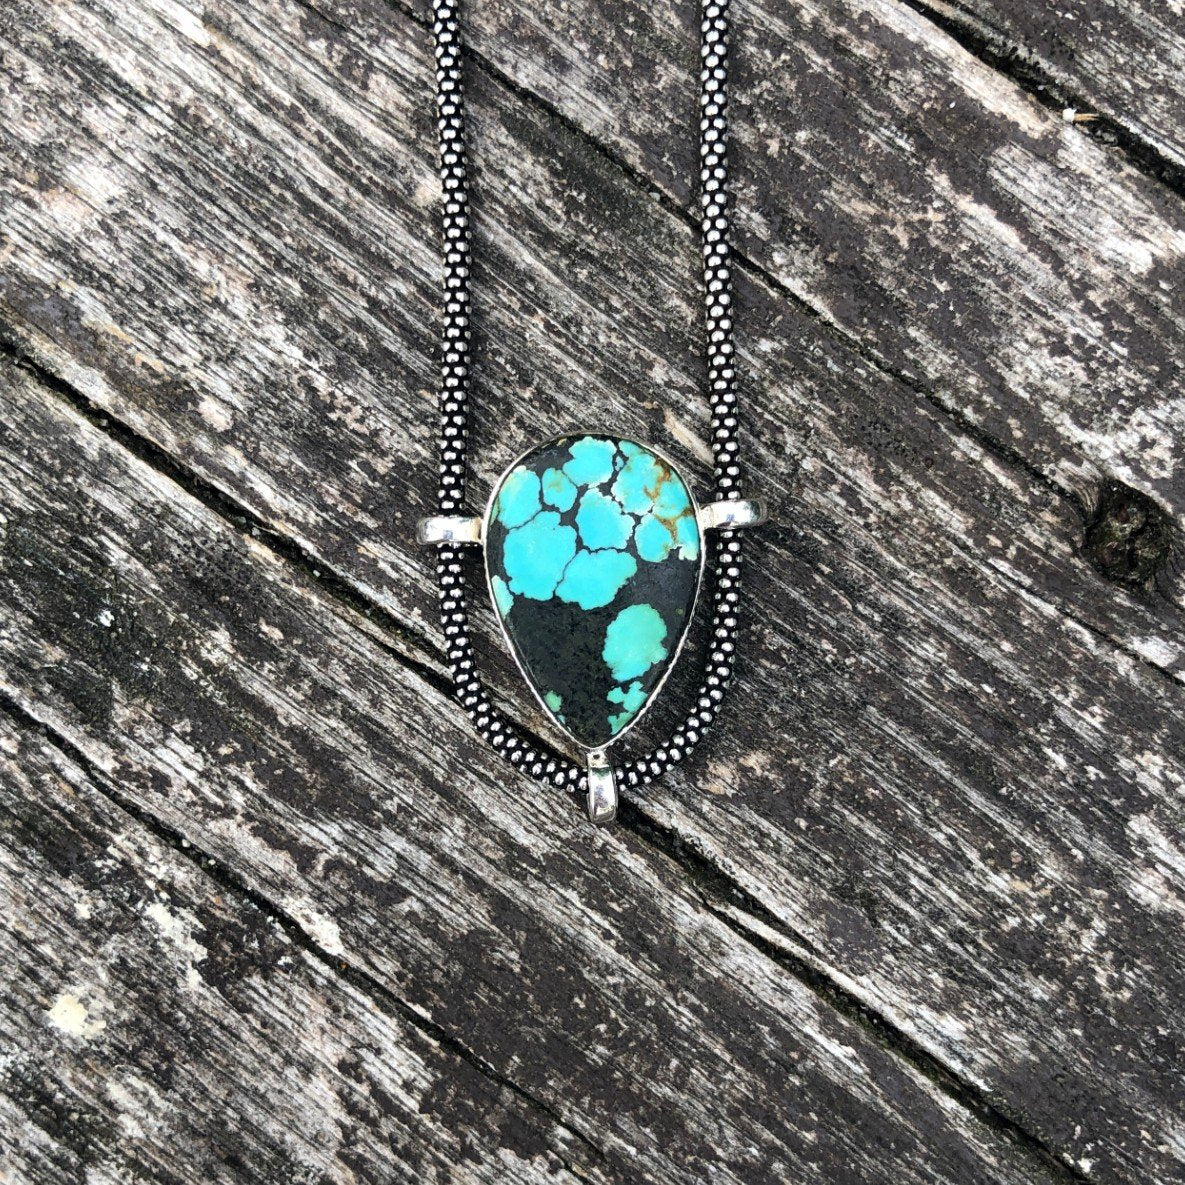 authentic turquoise upside down tear shaped pendant on unique setting weathered driftwood background. sterling silver oxidized chain